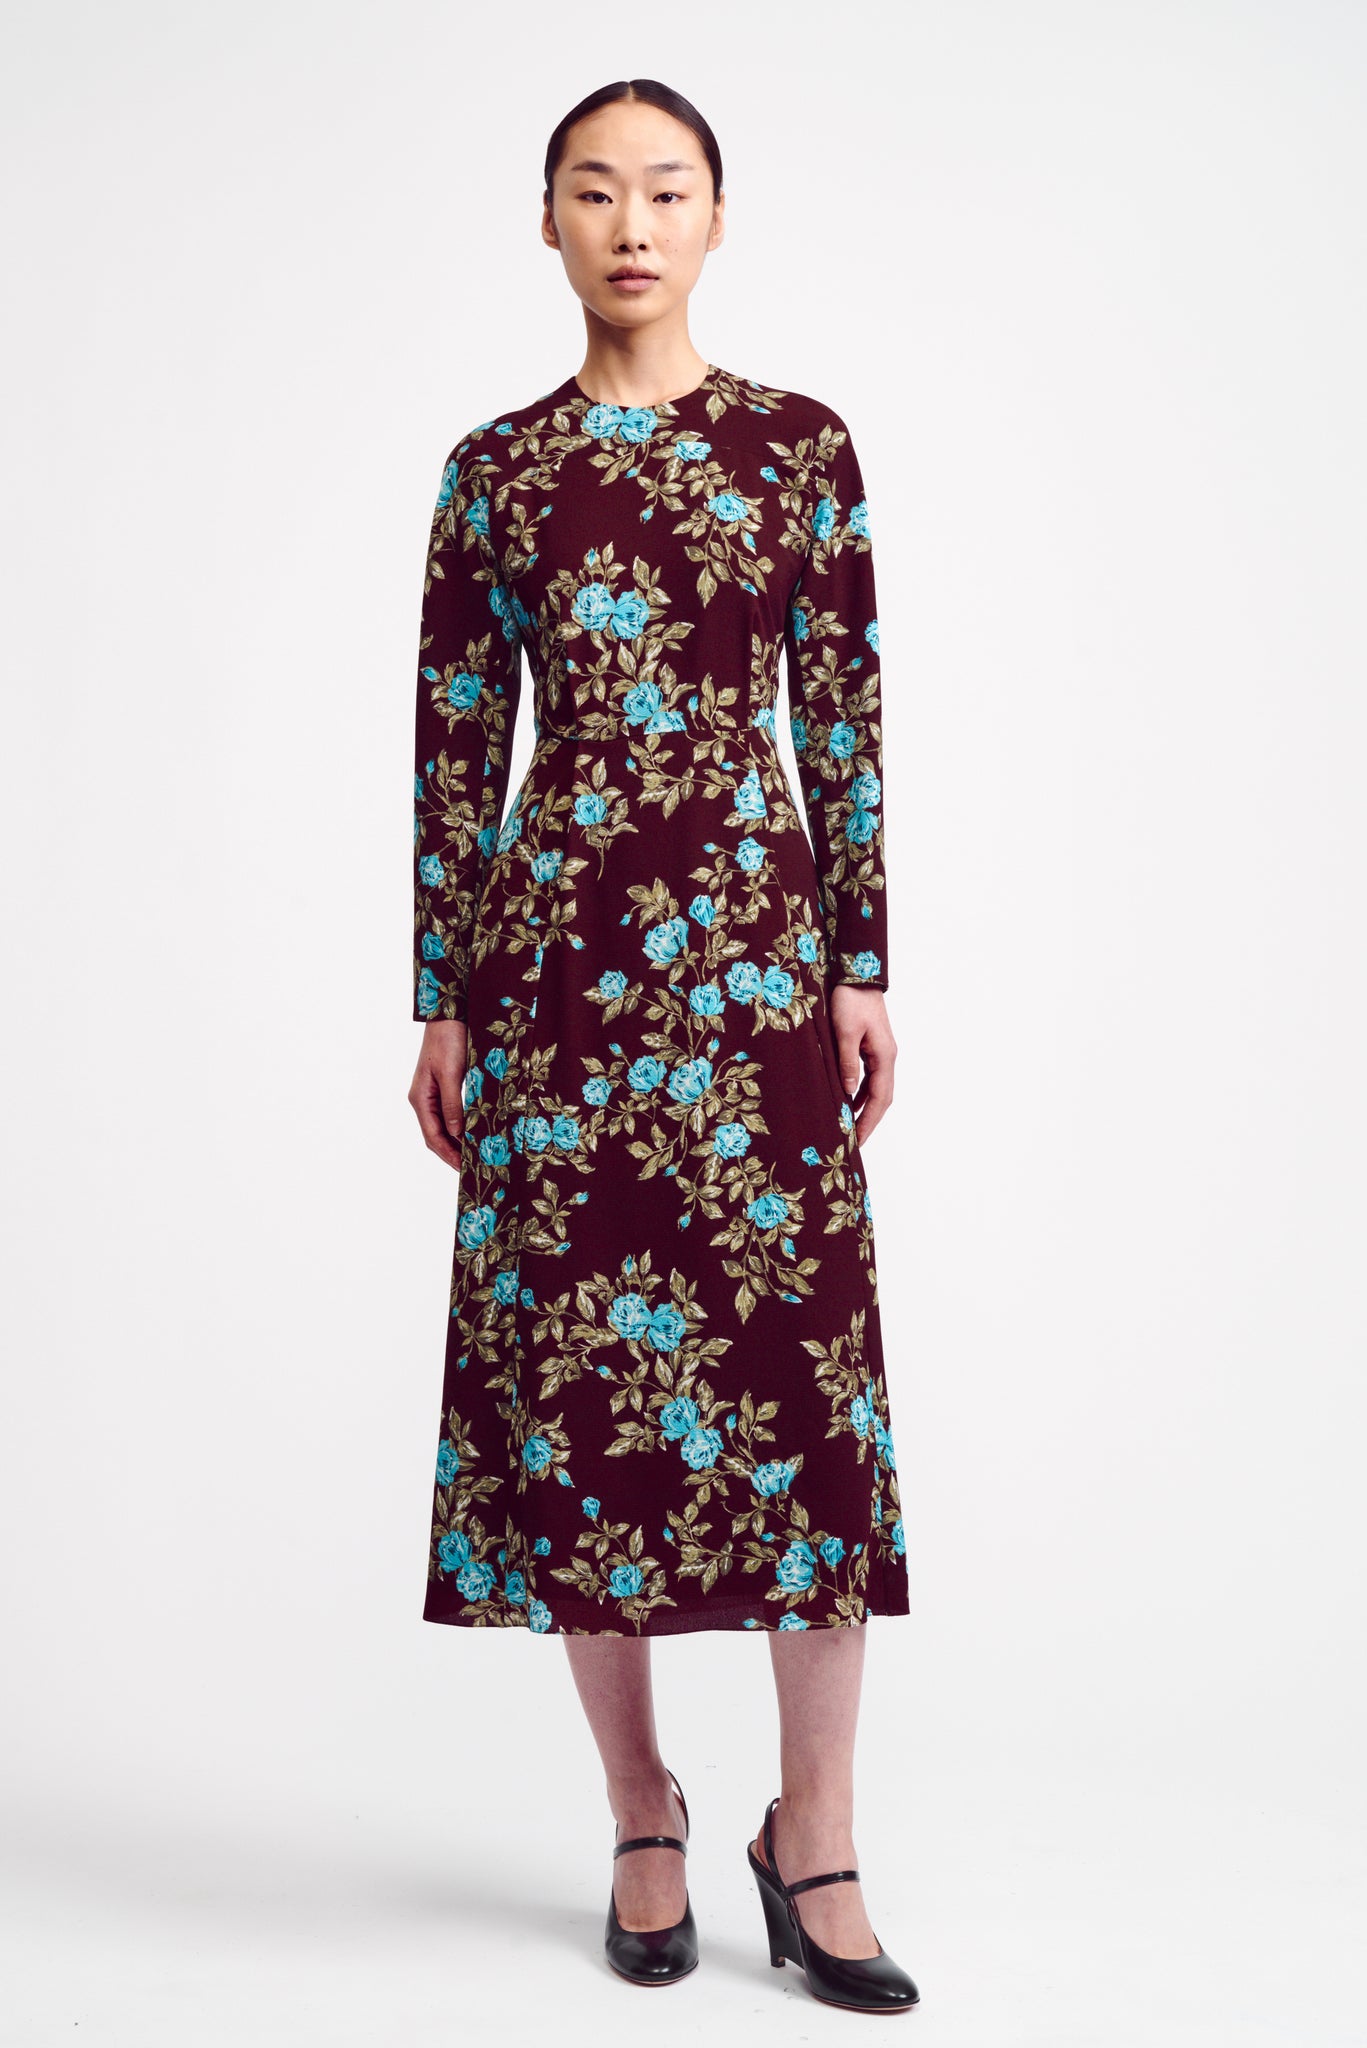 Roland Dress in Turquoise Floral Printed Crepe Georgette | Emilia Wickstead